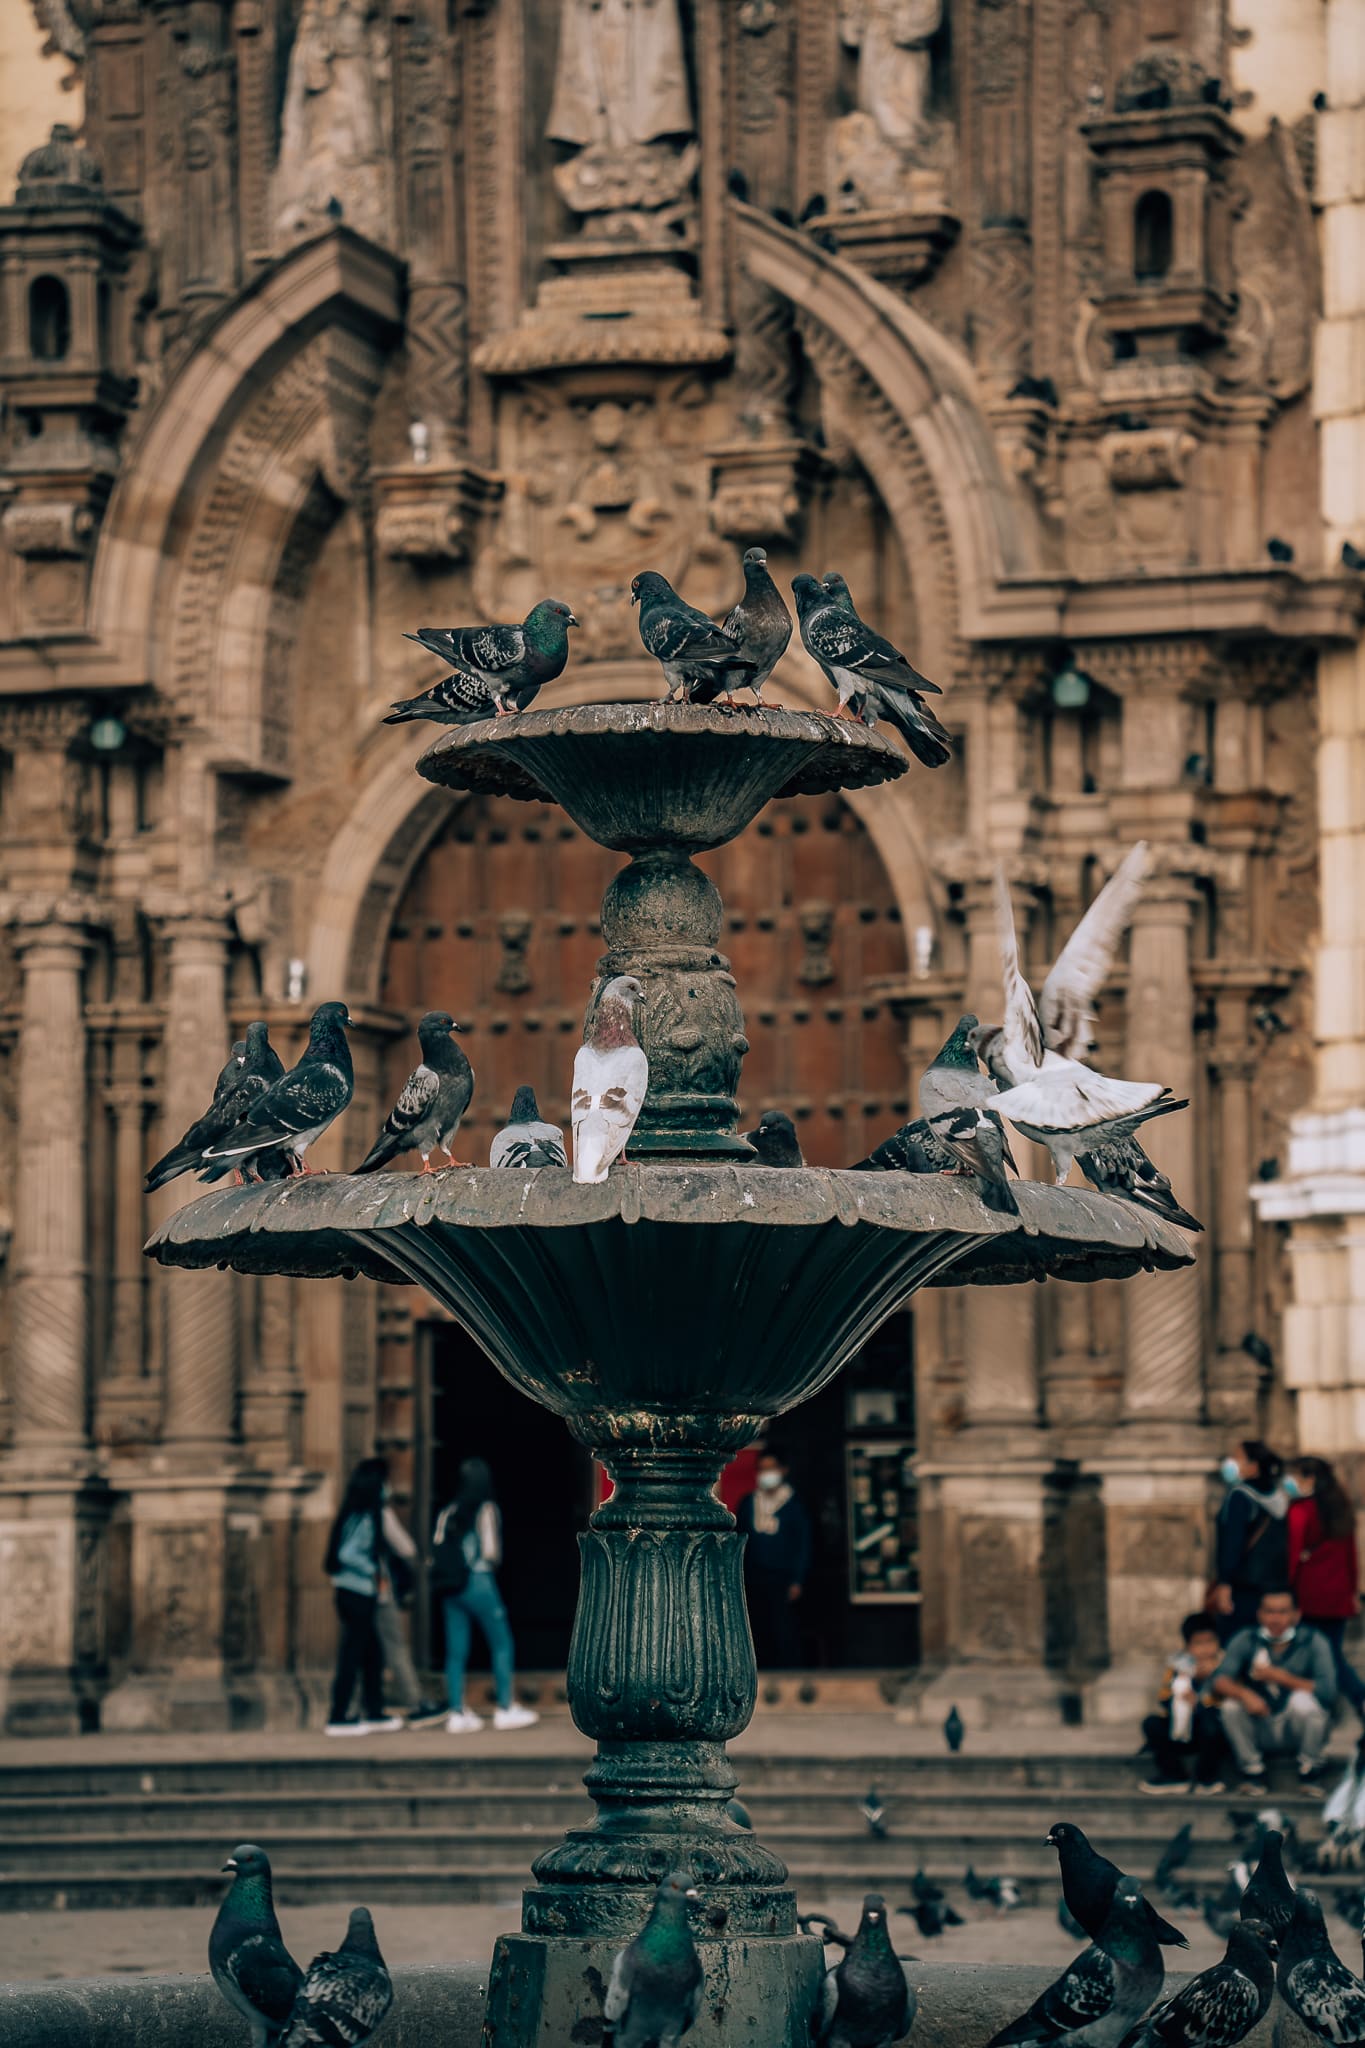 Birds on a fountain in Lima, Peru with the cathedral in the background